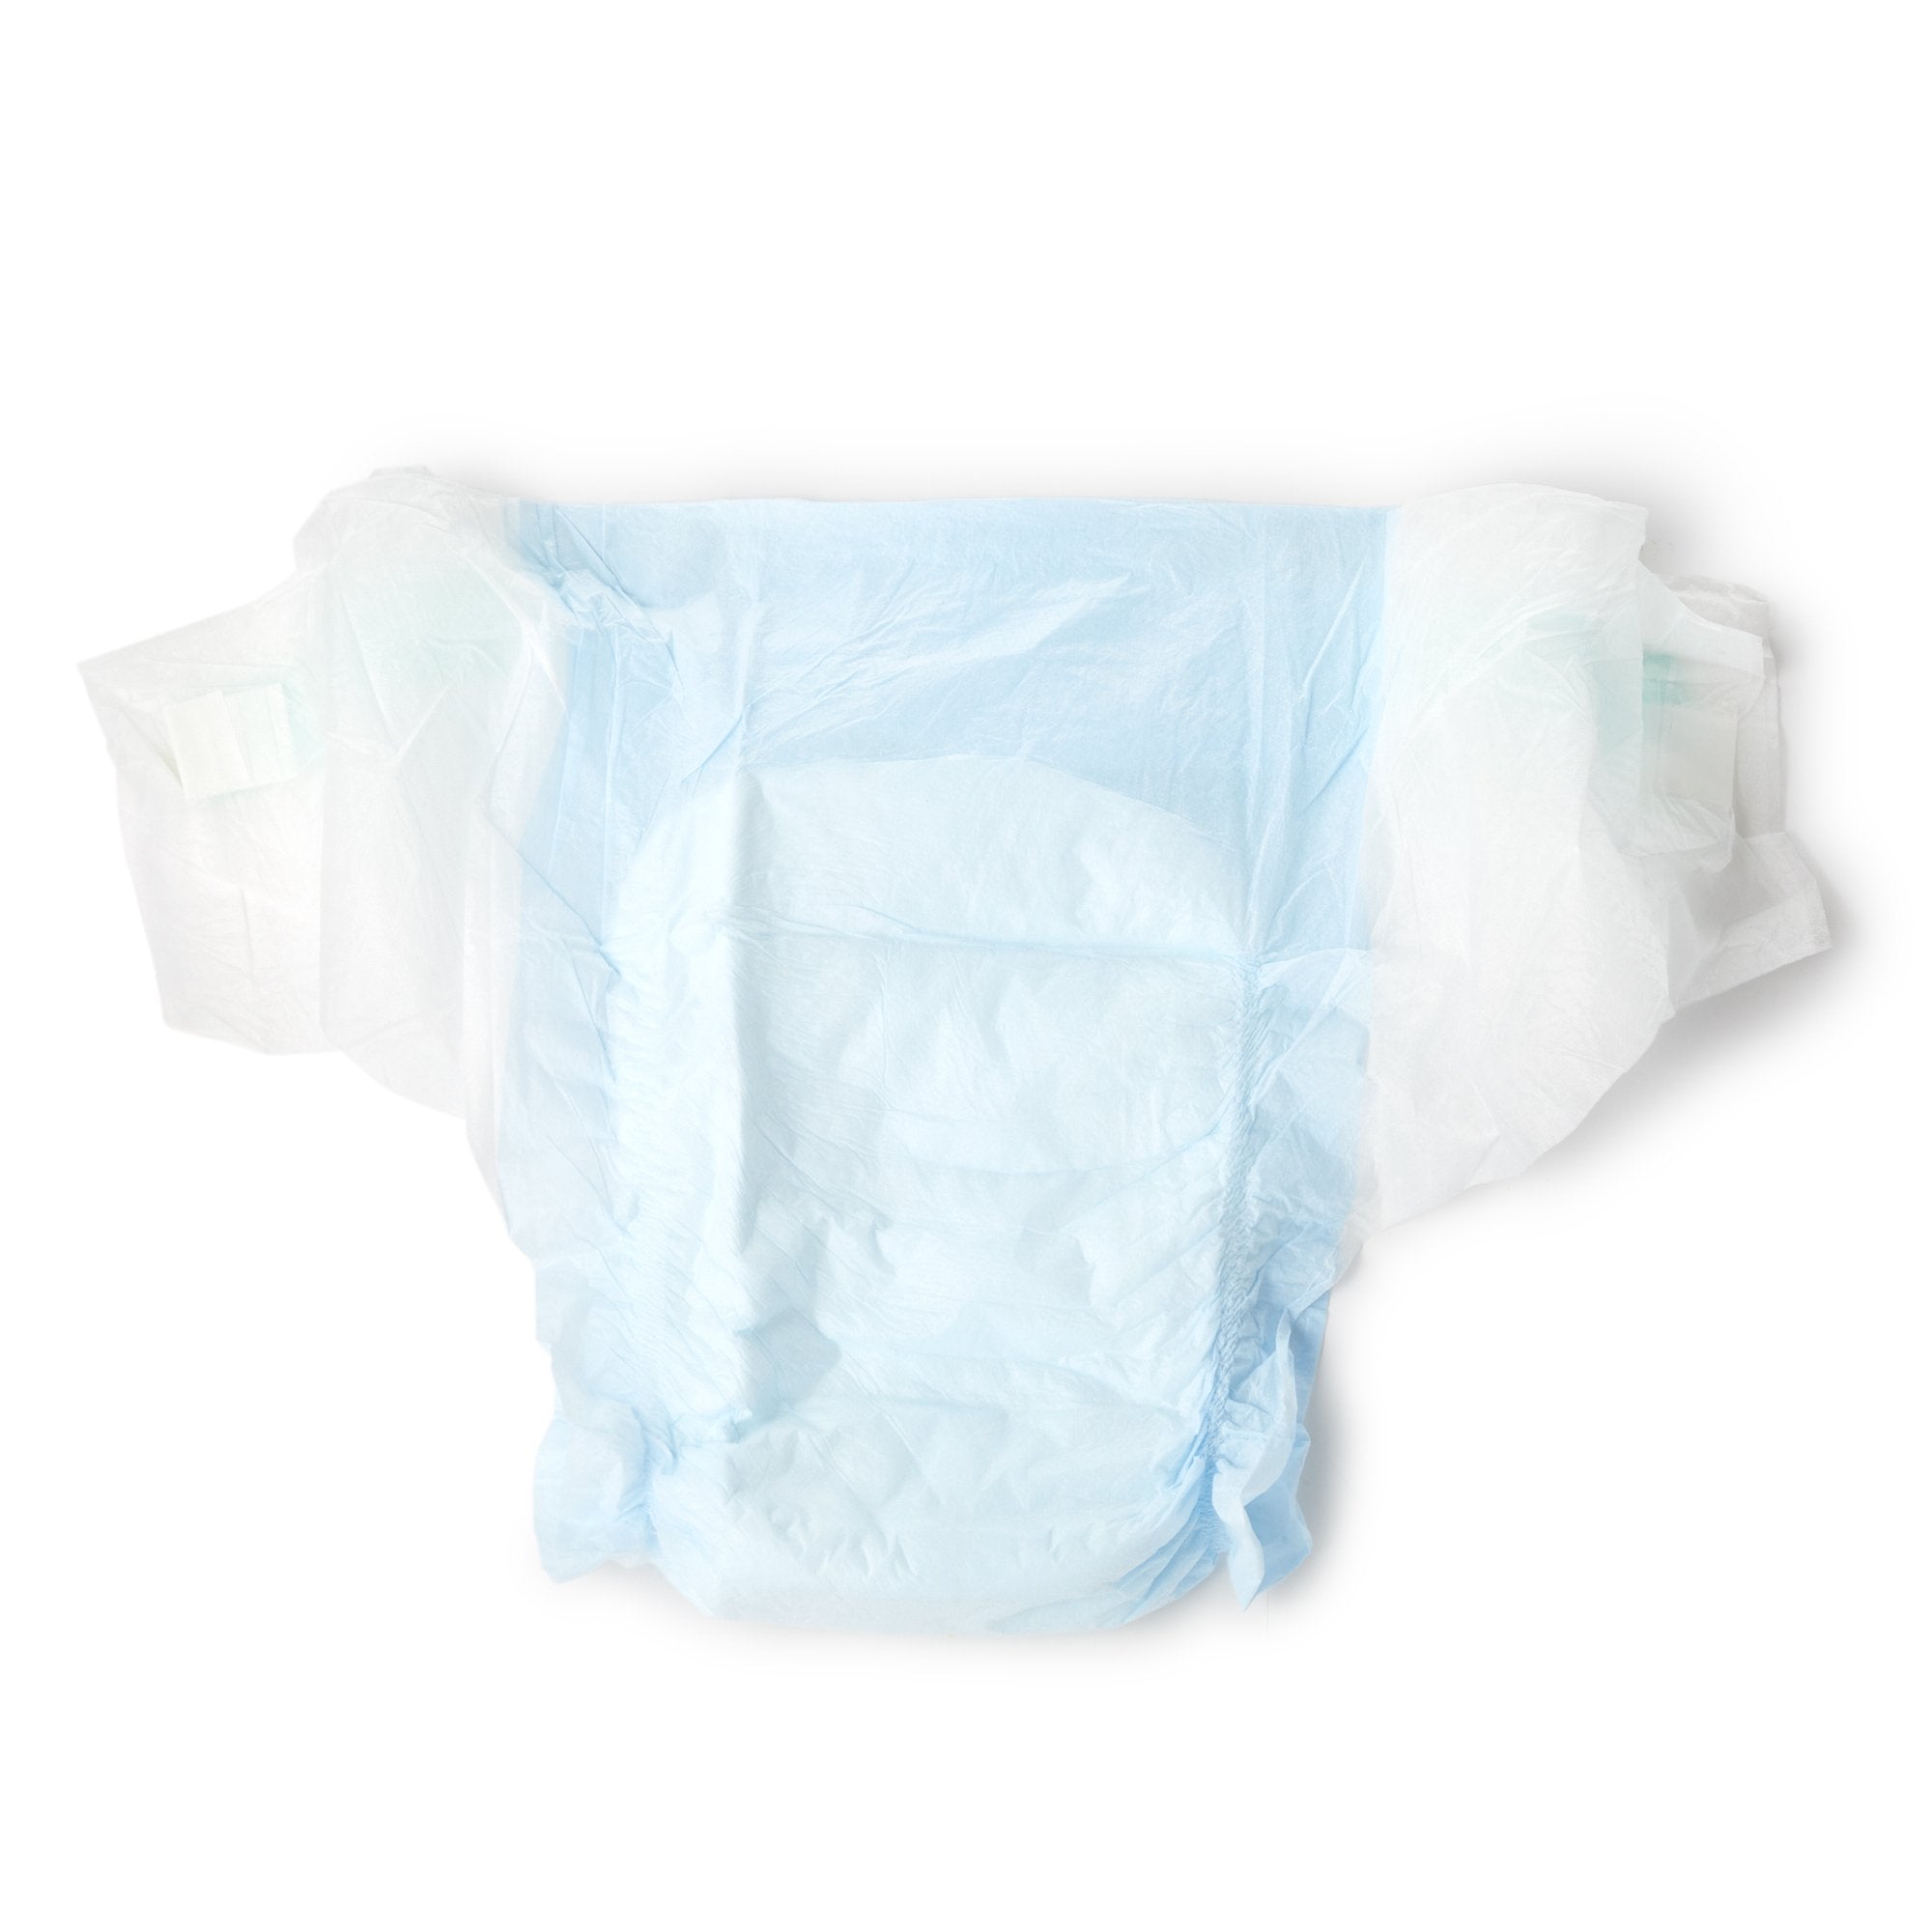 Unisex Adult Incontinence Brief Wings Large Disposable Heavy Absorbency